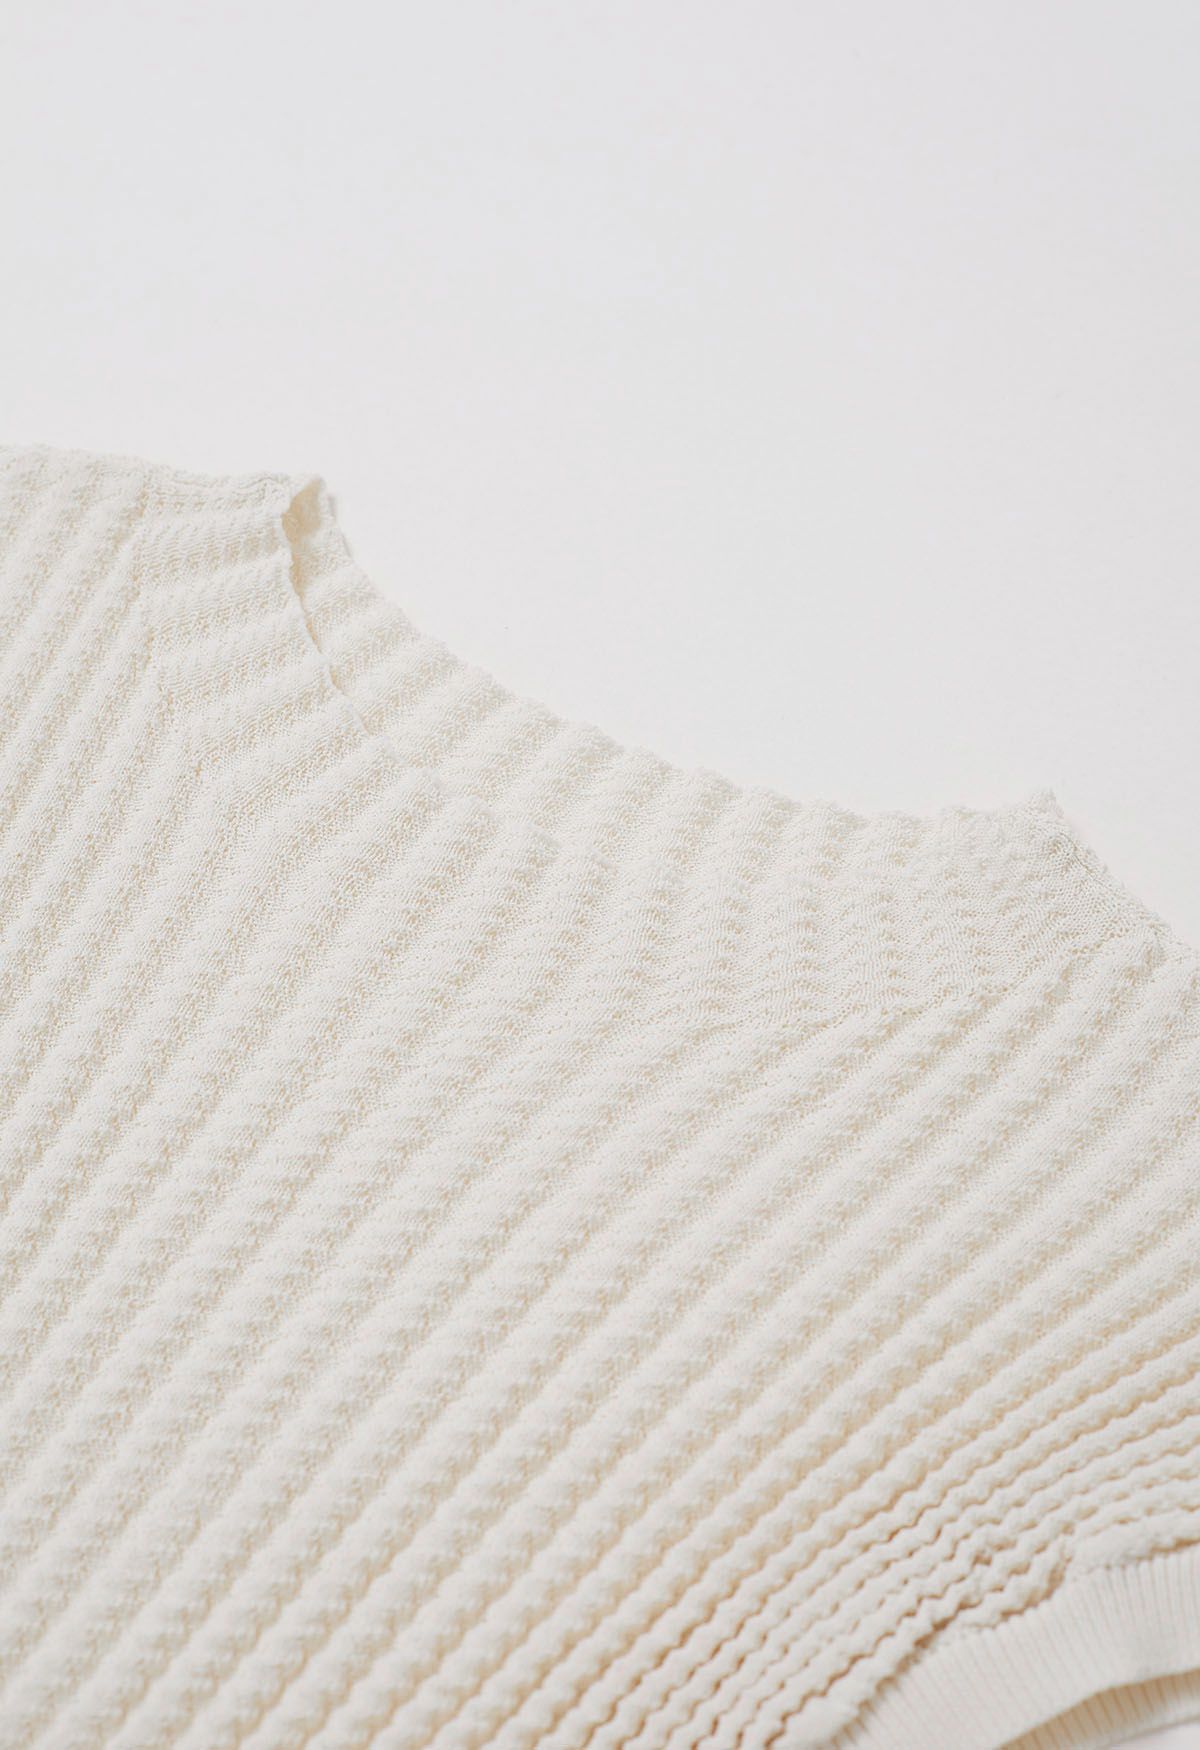 Ribbed Texture Cap Sleeves Top in Cream